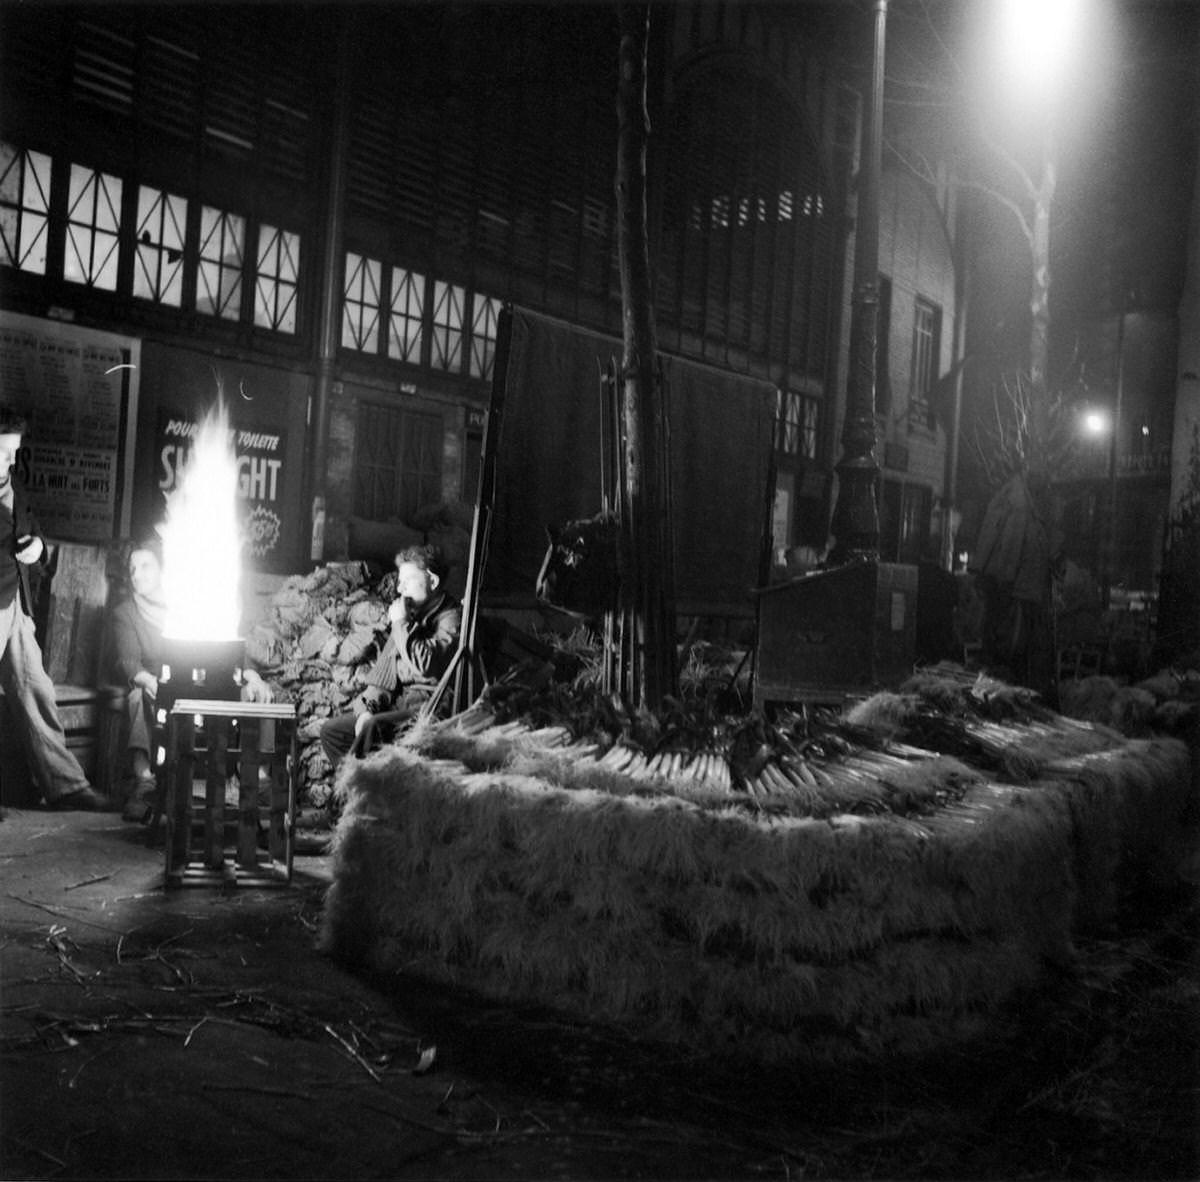 Men in front of a brazier behind leeks at night in Les Halles, 1953